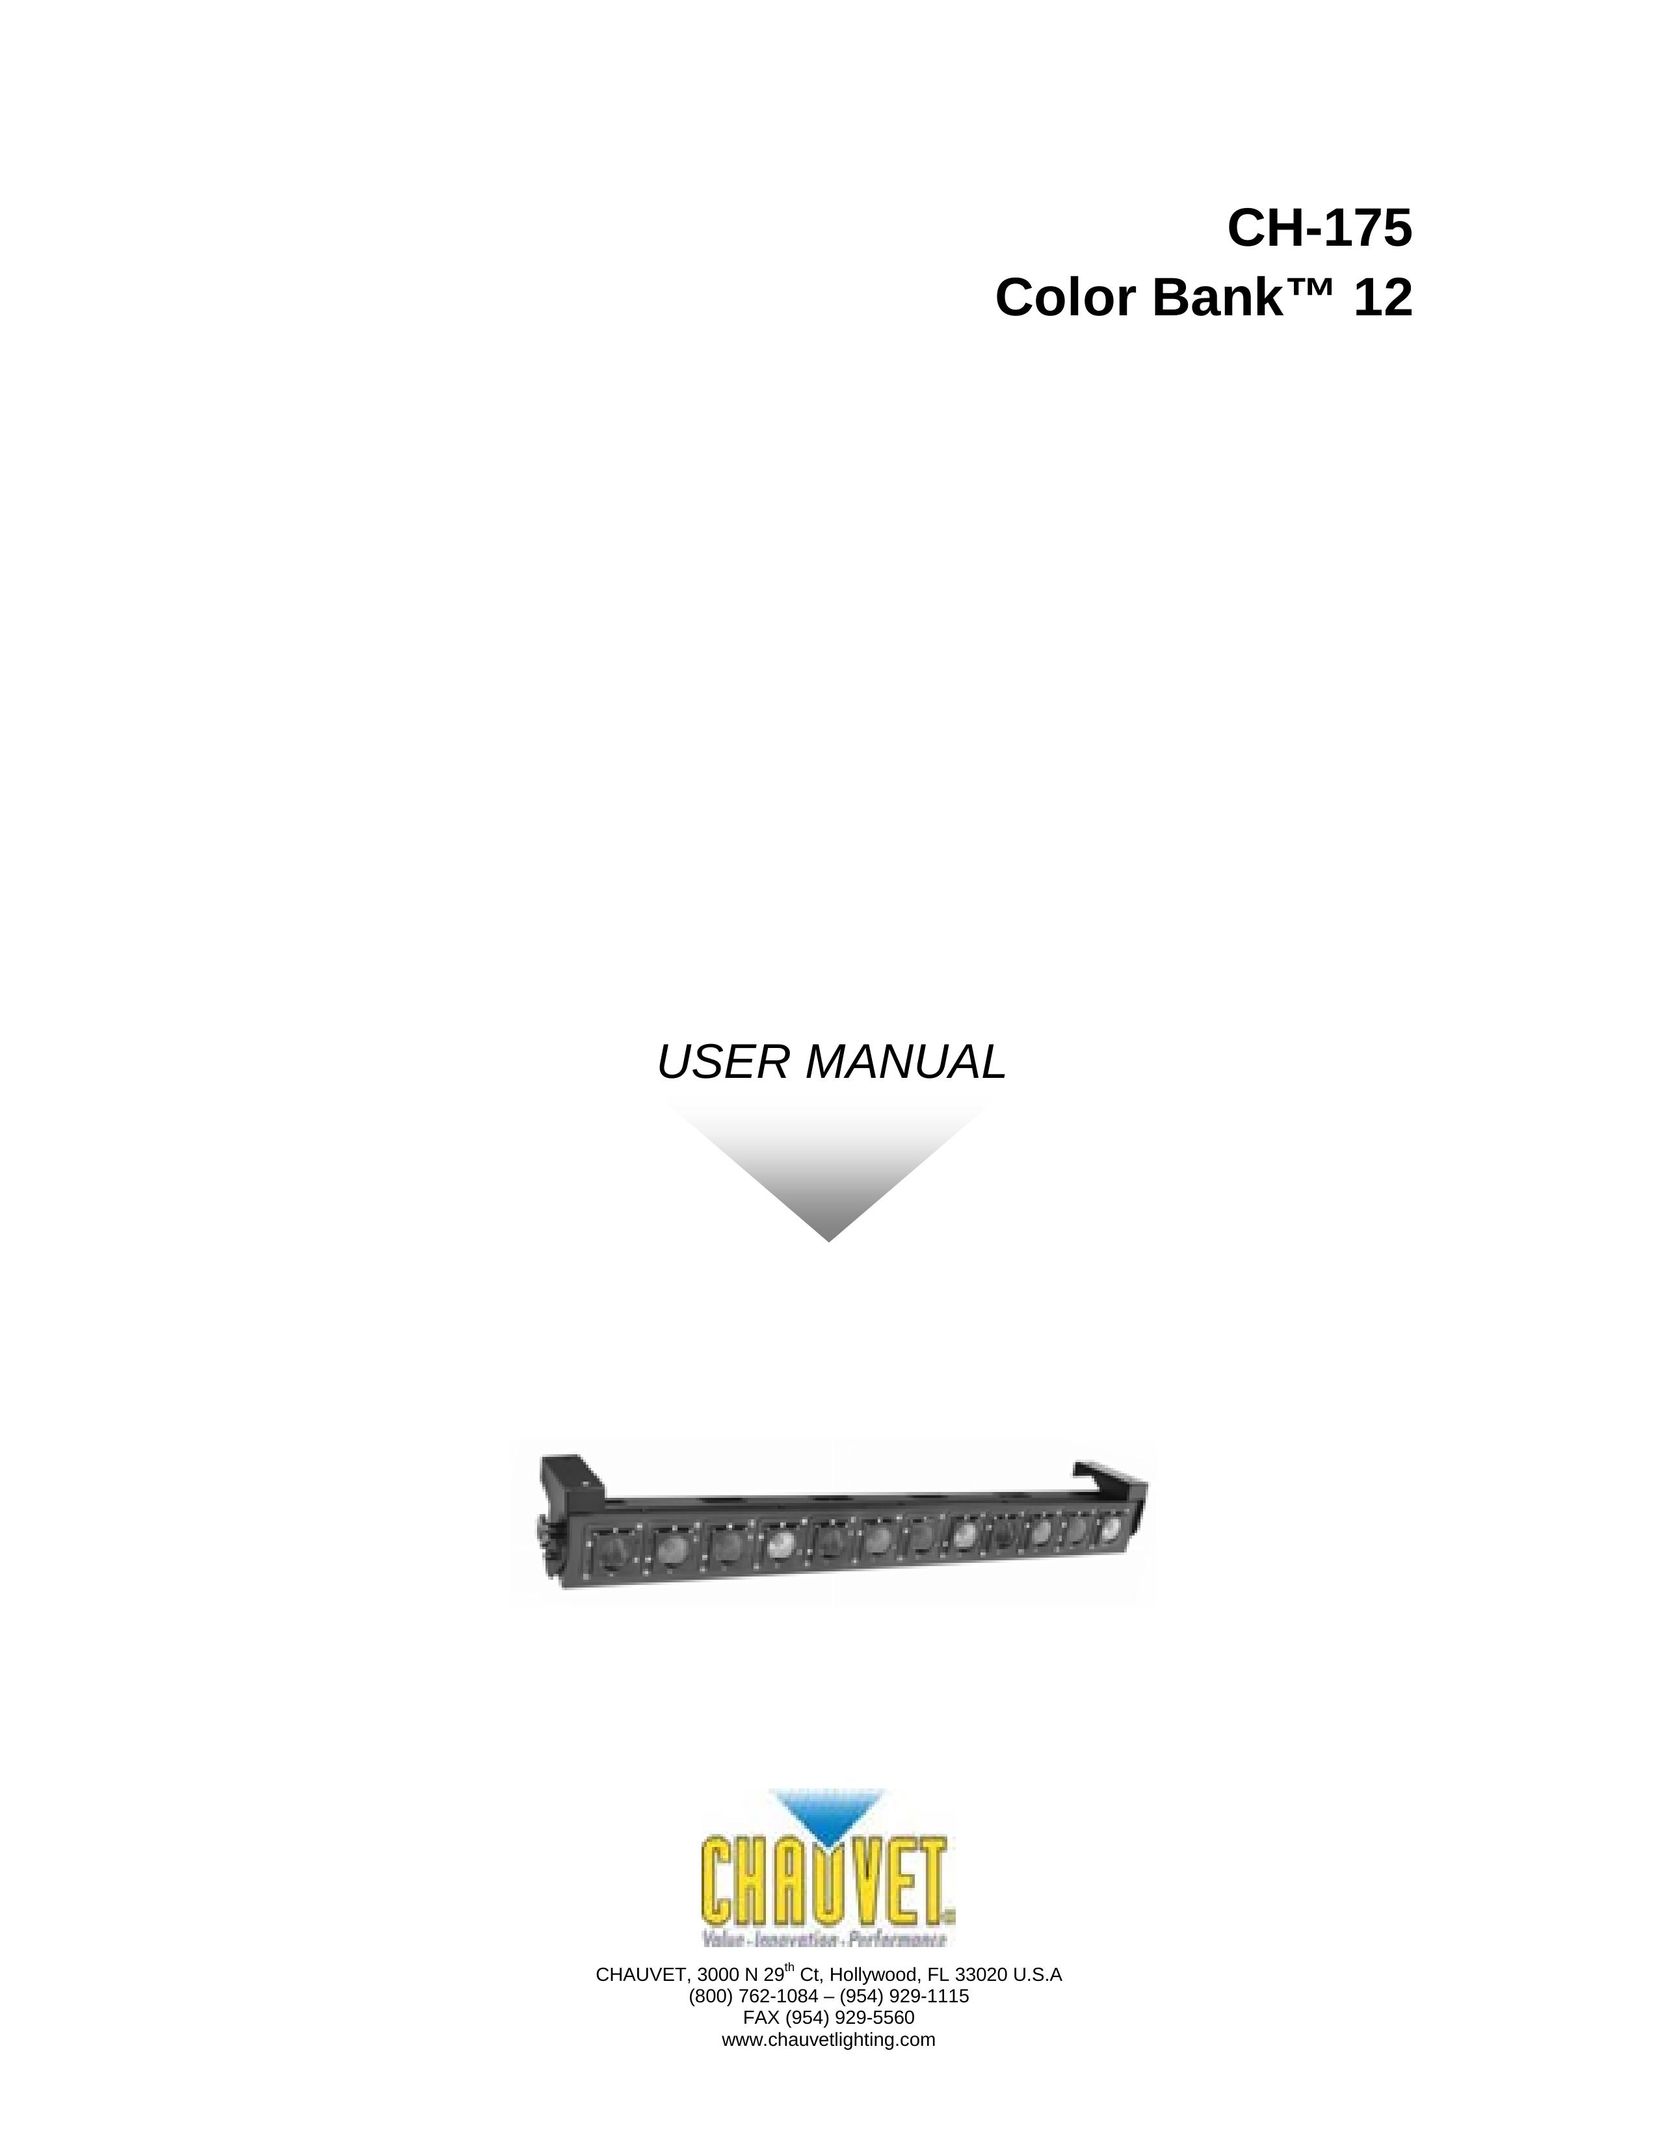 Chauvet CH-175 Indoor Furnishings User Manual